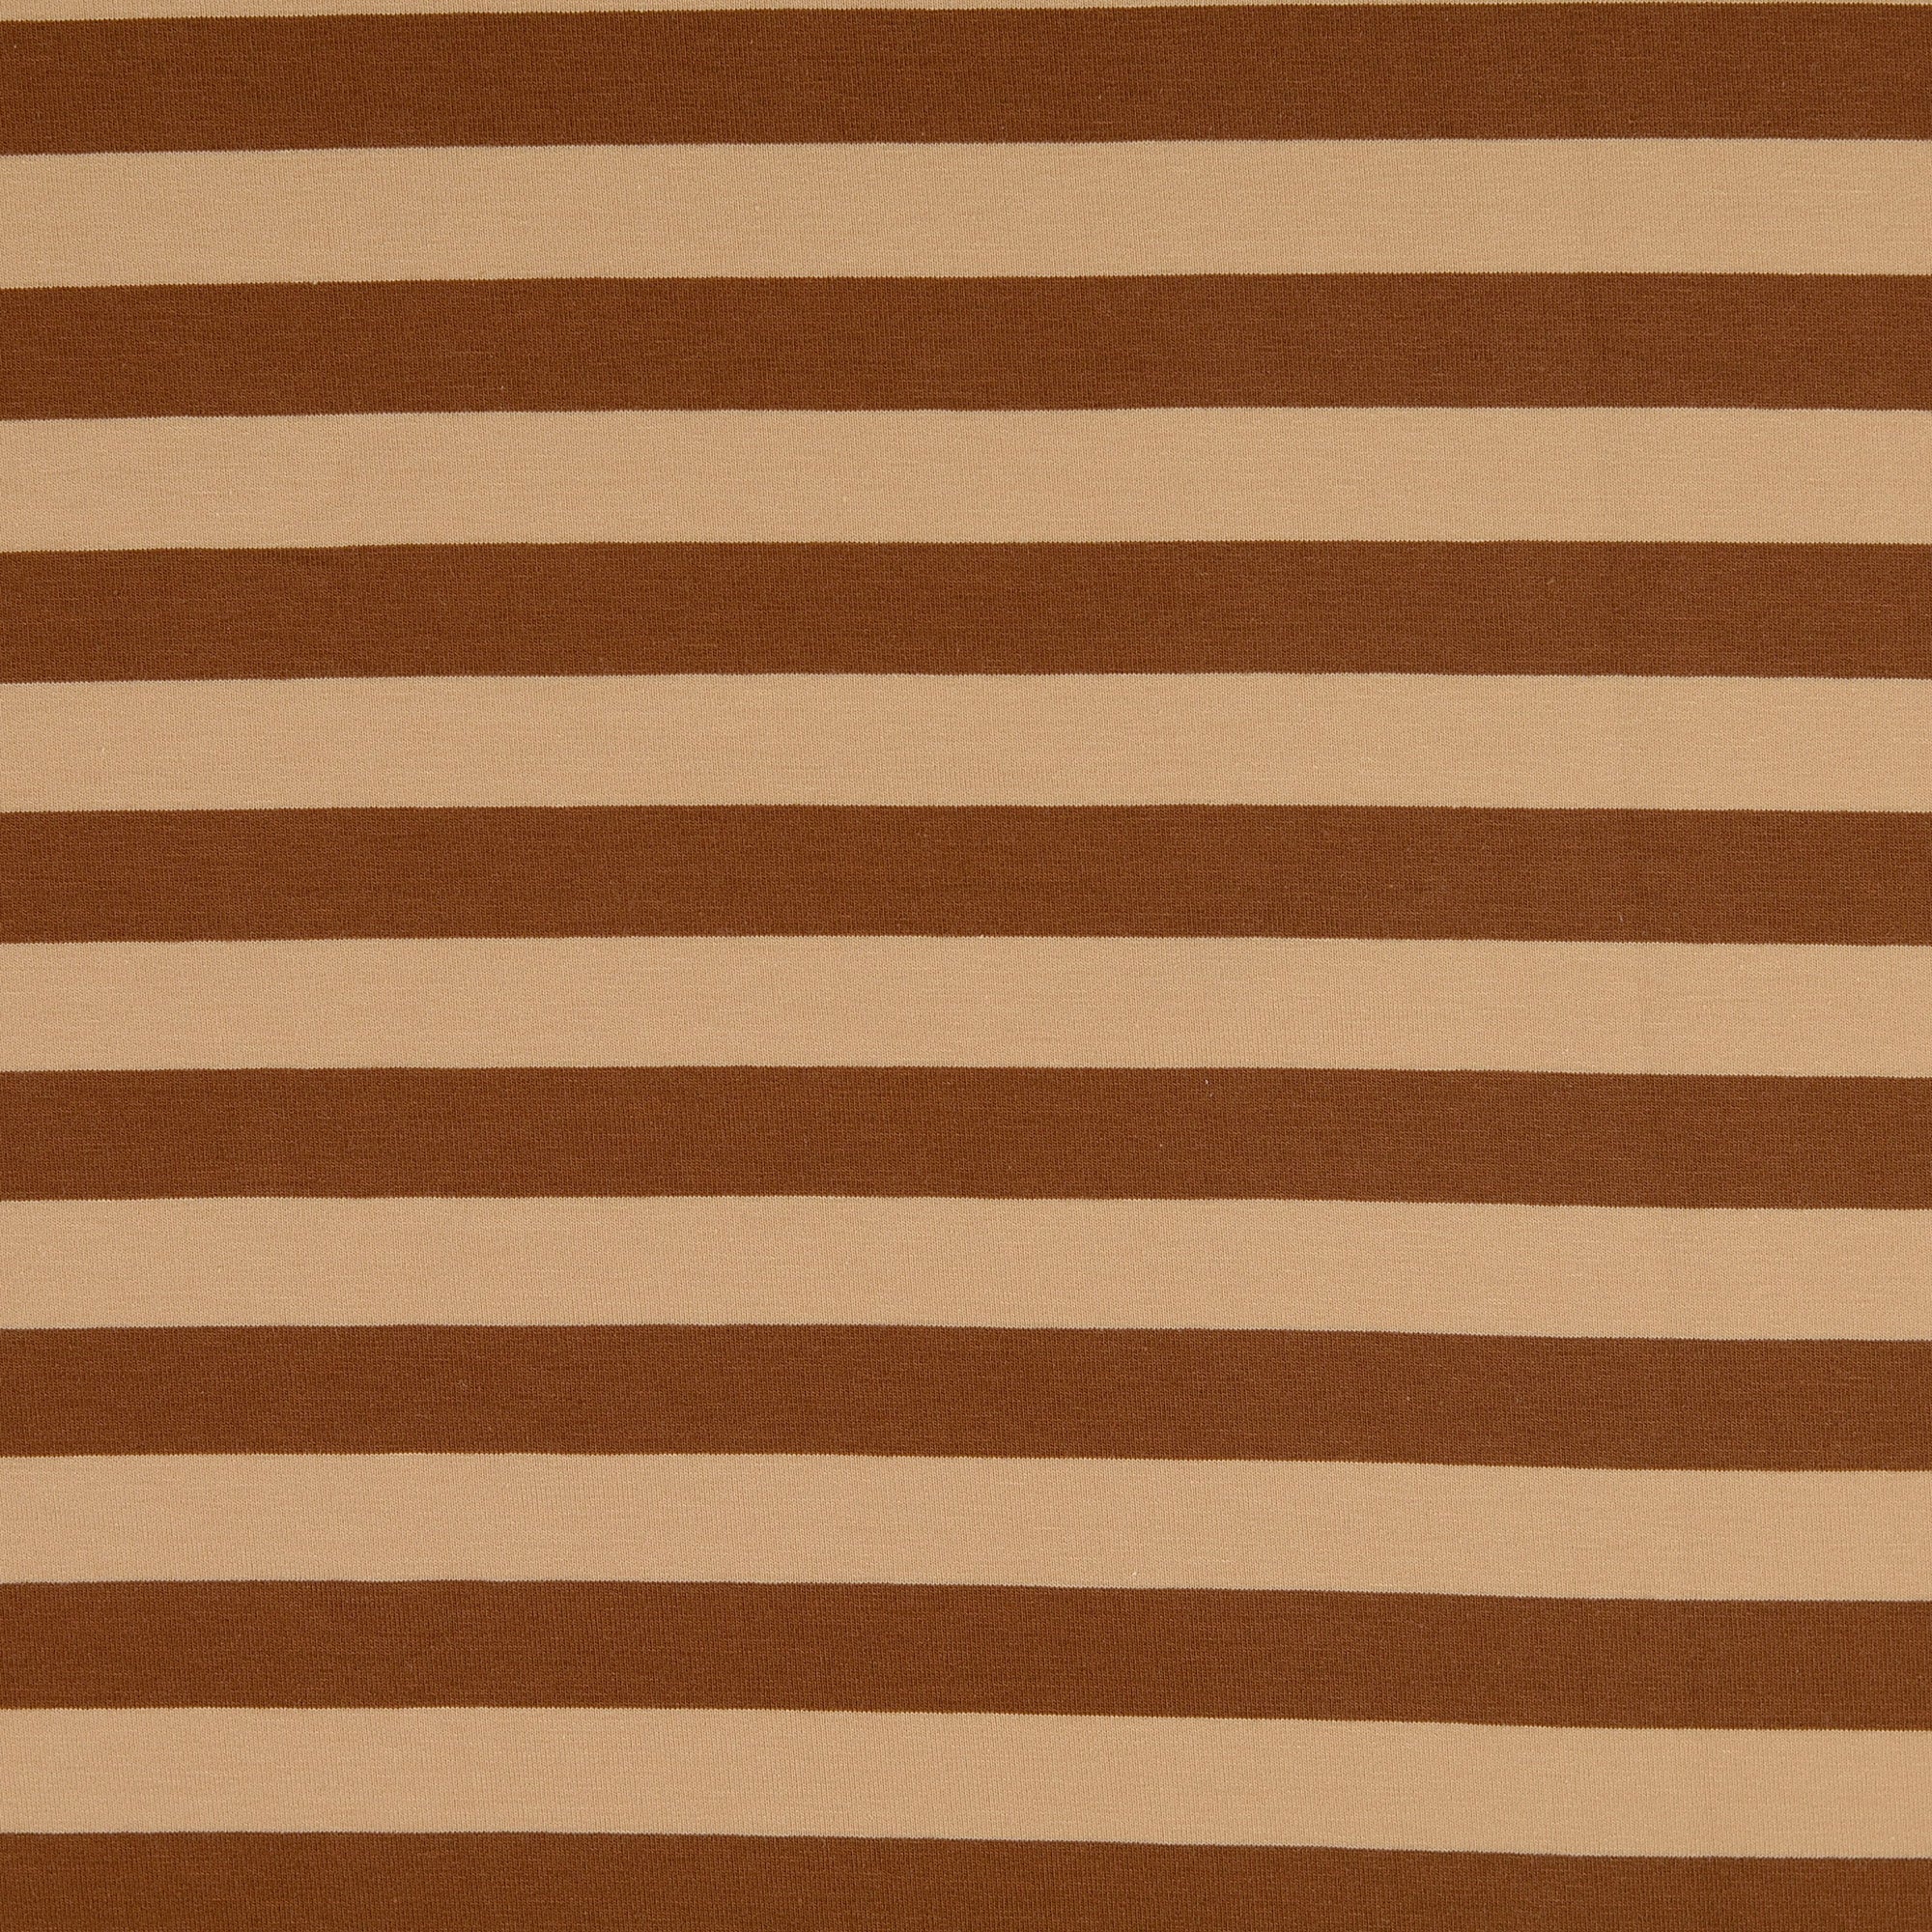 REMNANT 1.6 Metres - Yarn Dyed Stripes in Camel Brown French Terry Fabric